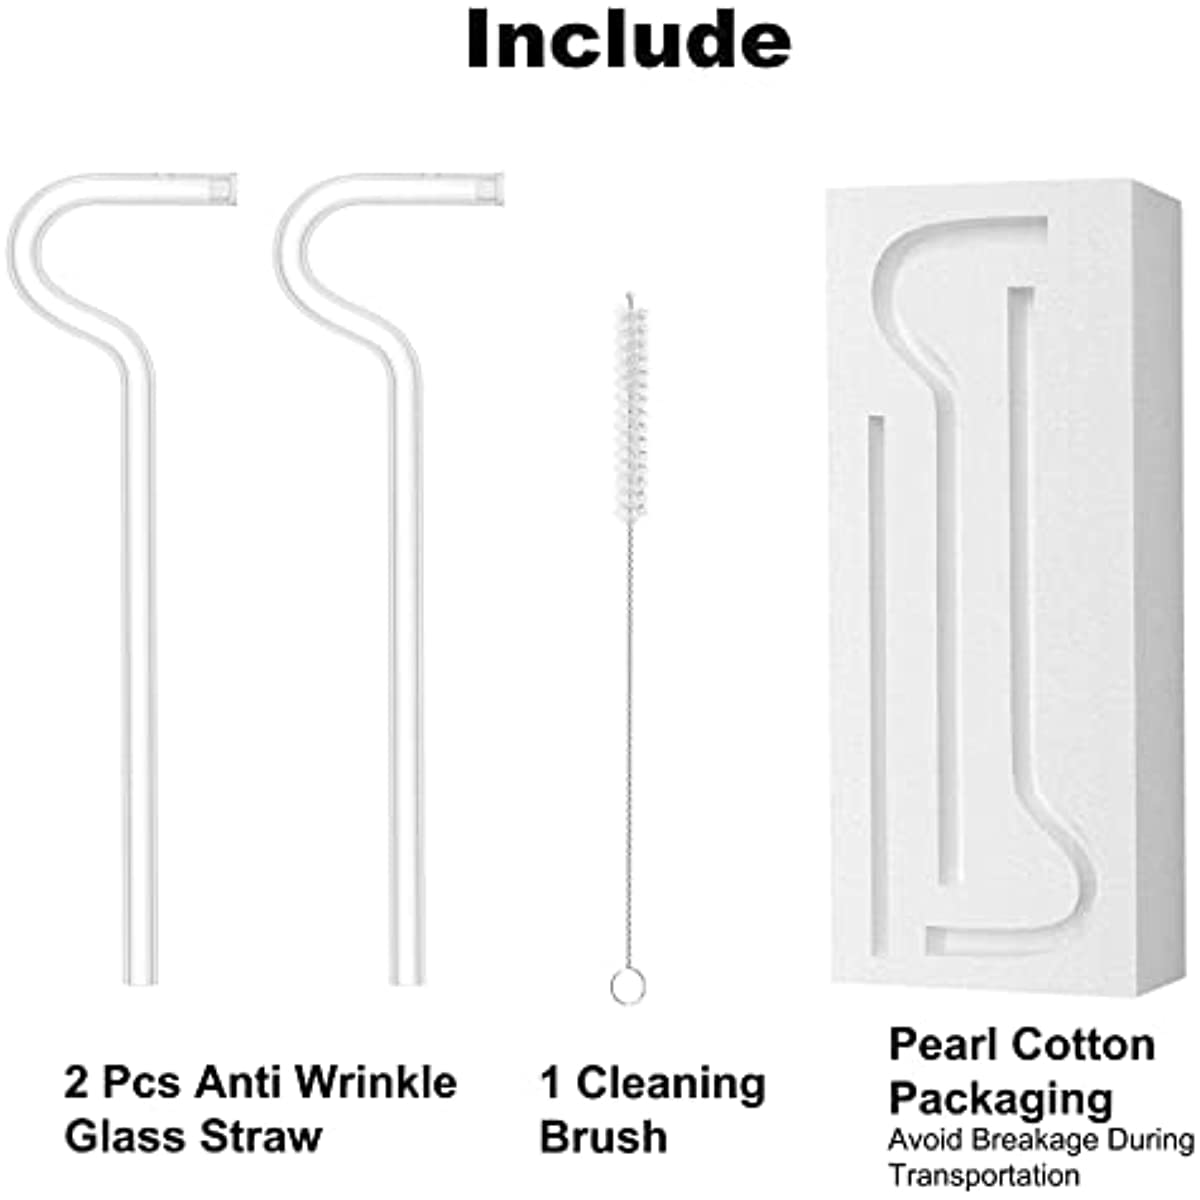 2pcs Anti Wrinkle Straw, Reusable Glass Straw For Stanley Cup